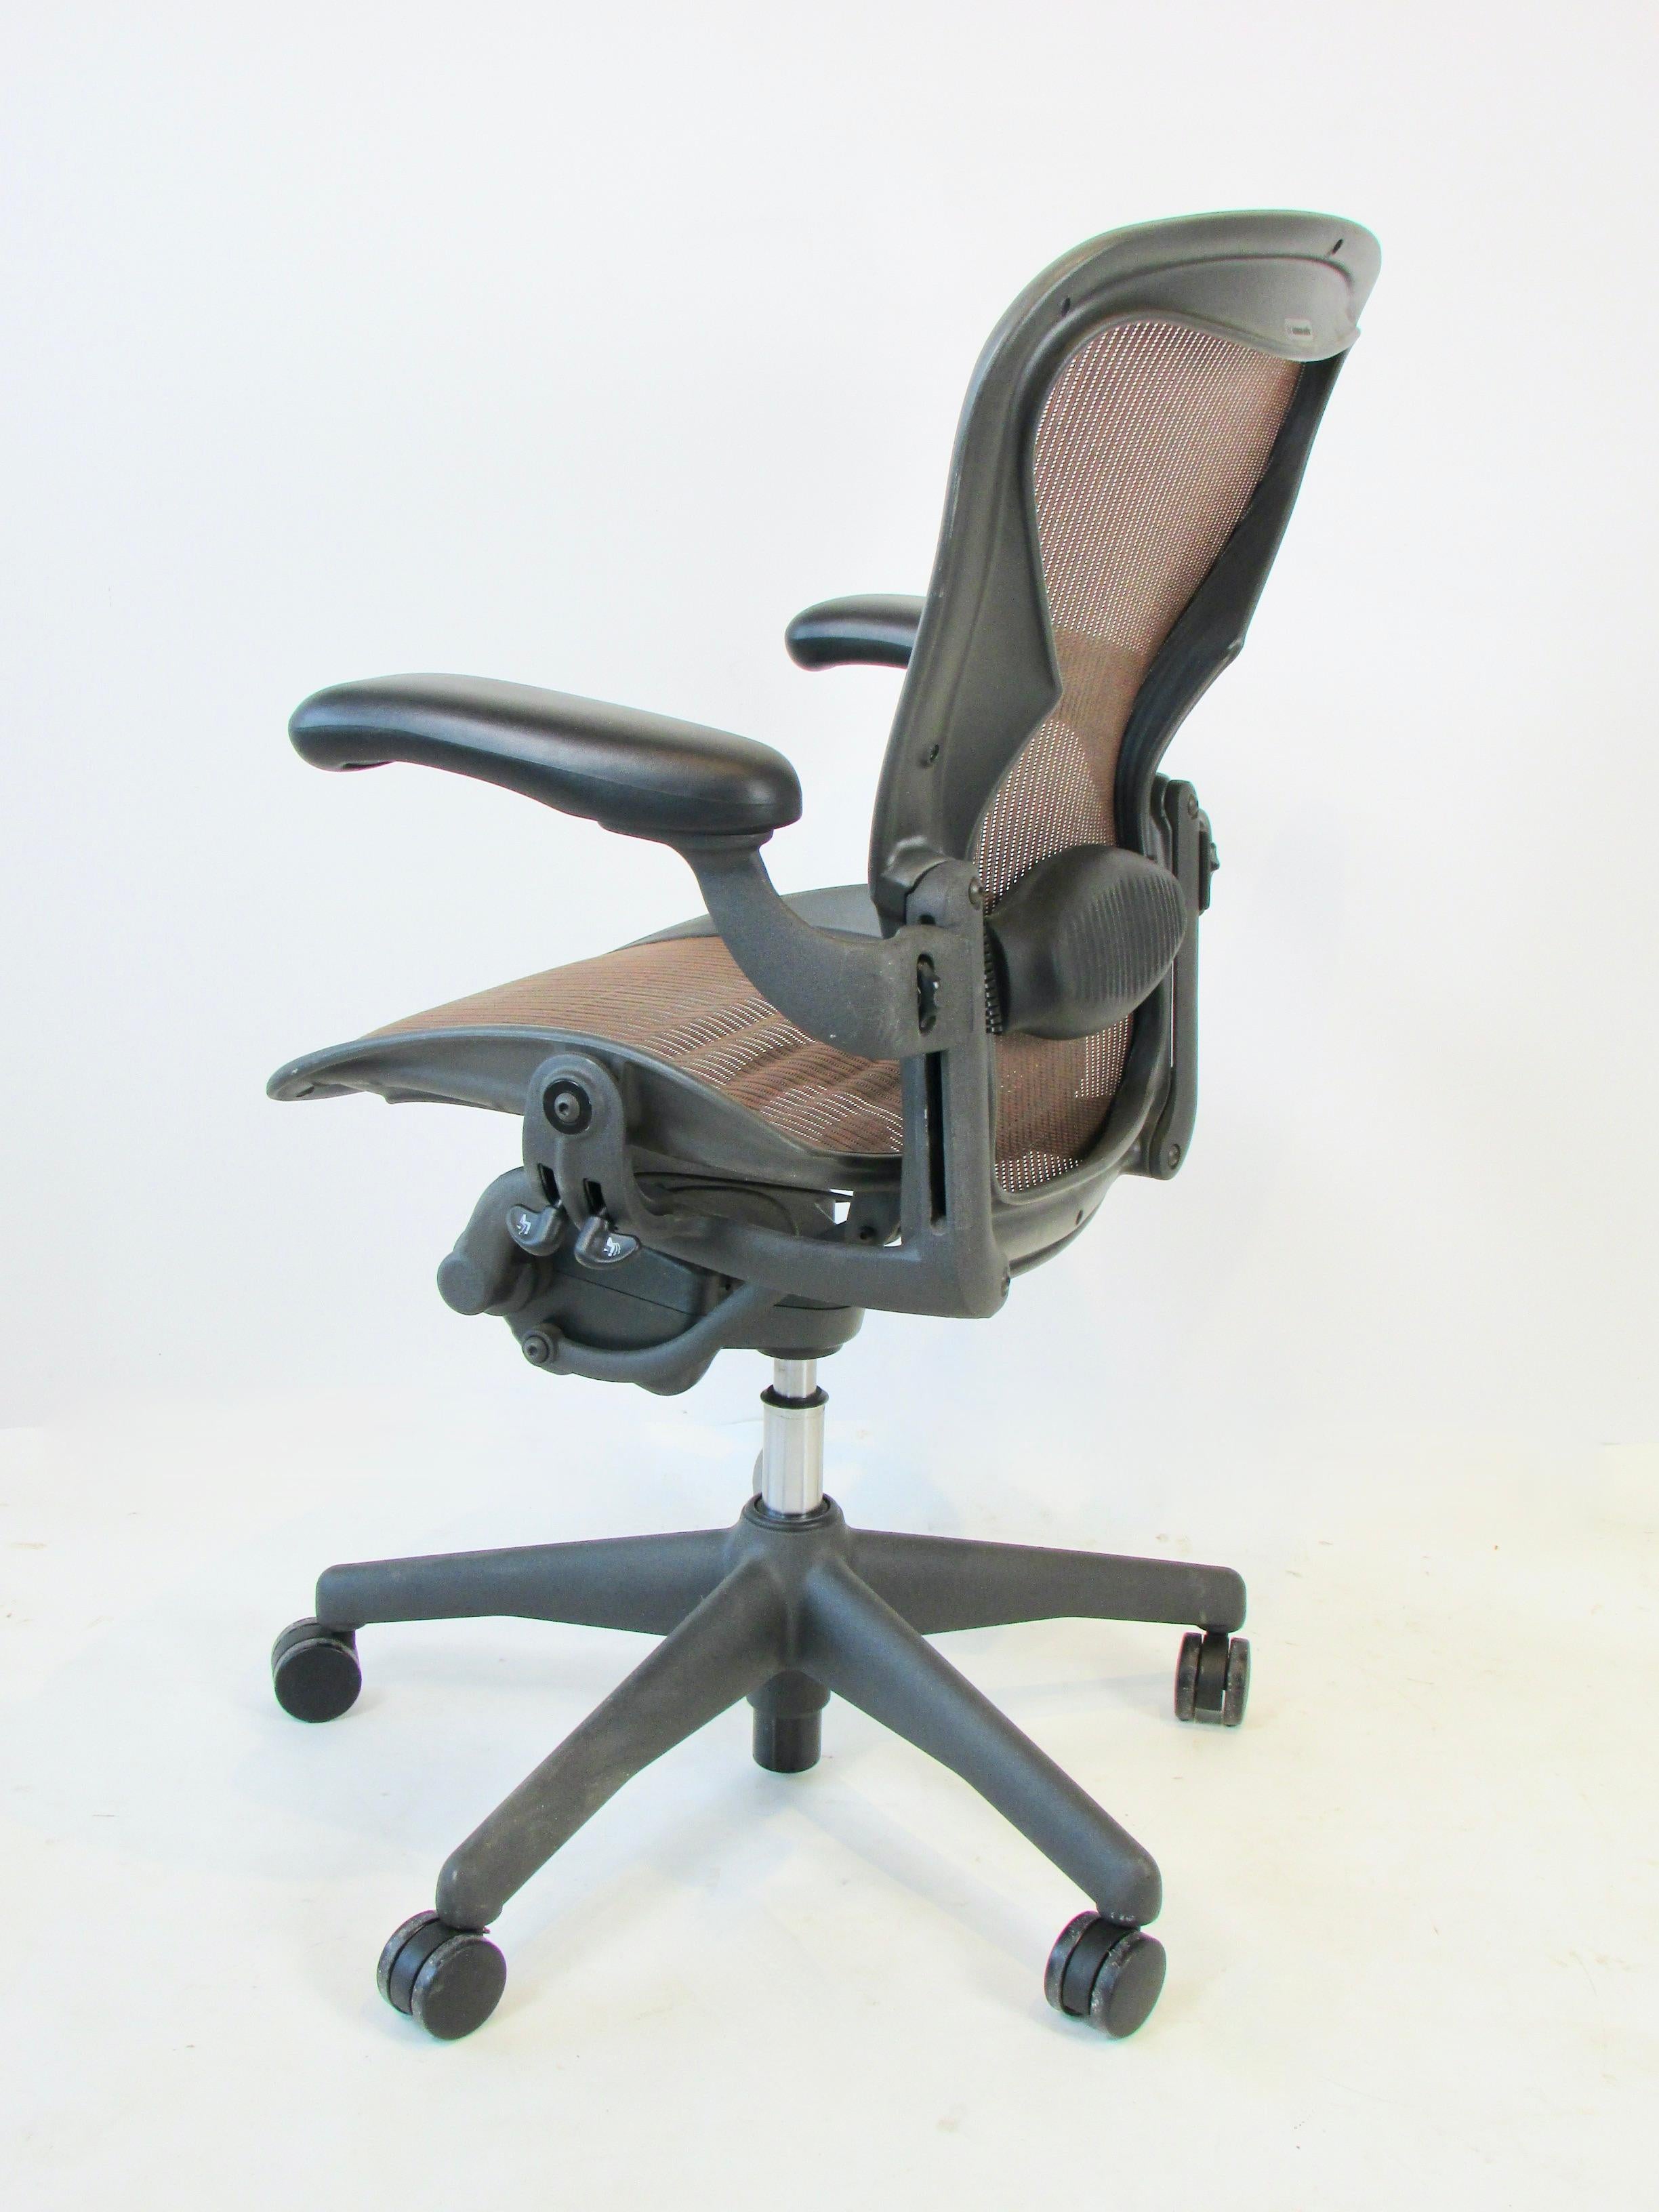 Multi Adjustable Tilt and Swivel Herman Miller Aeron Classic  Office Desk Chair In Good Condition For Sale In Ferndale, MI